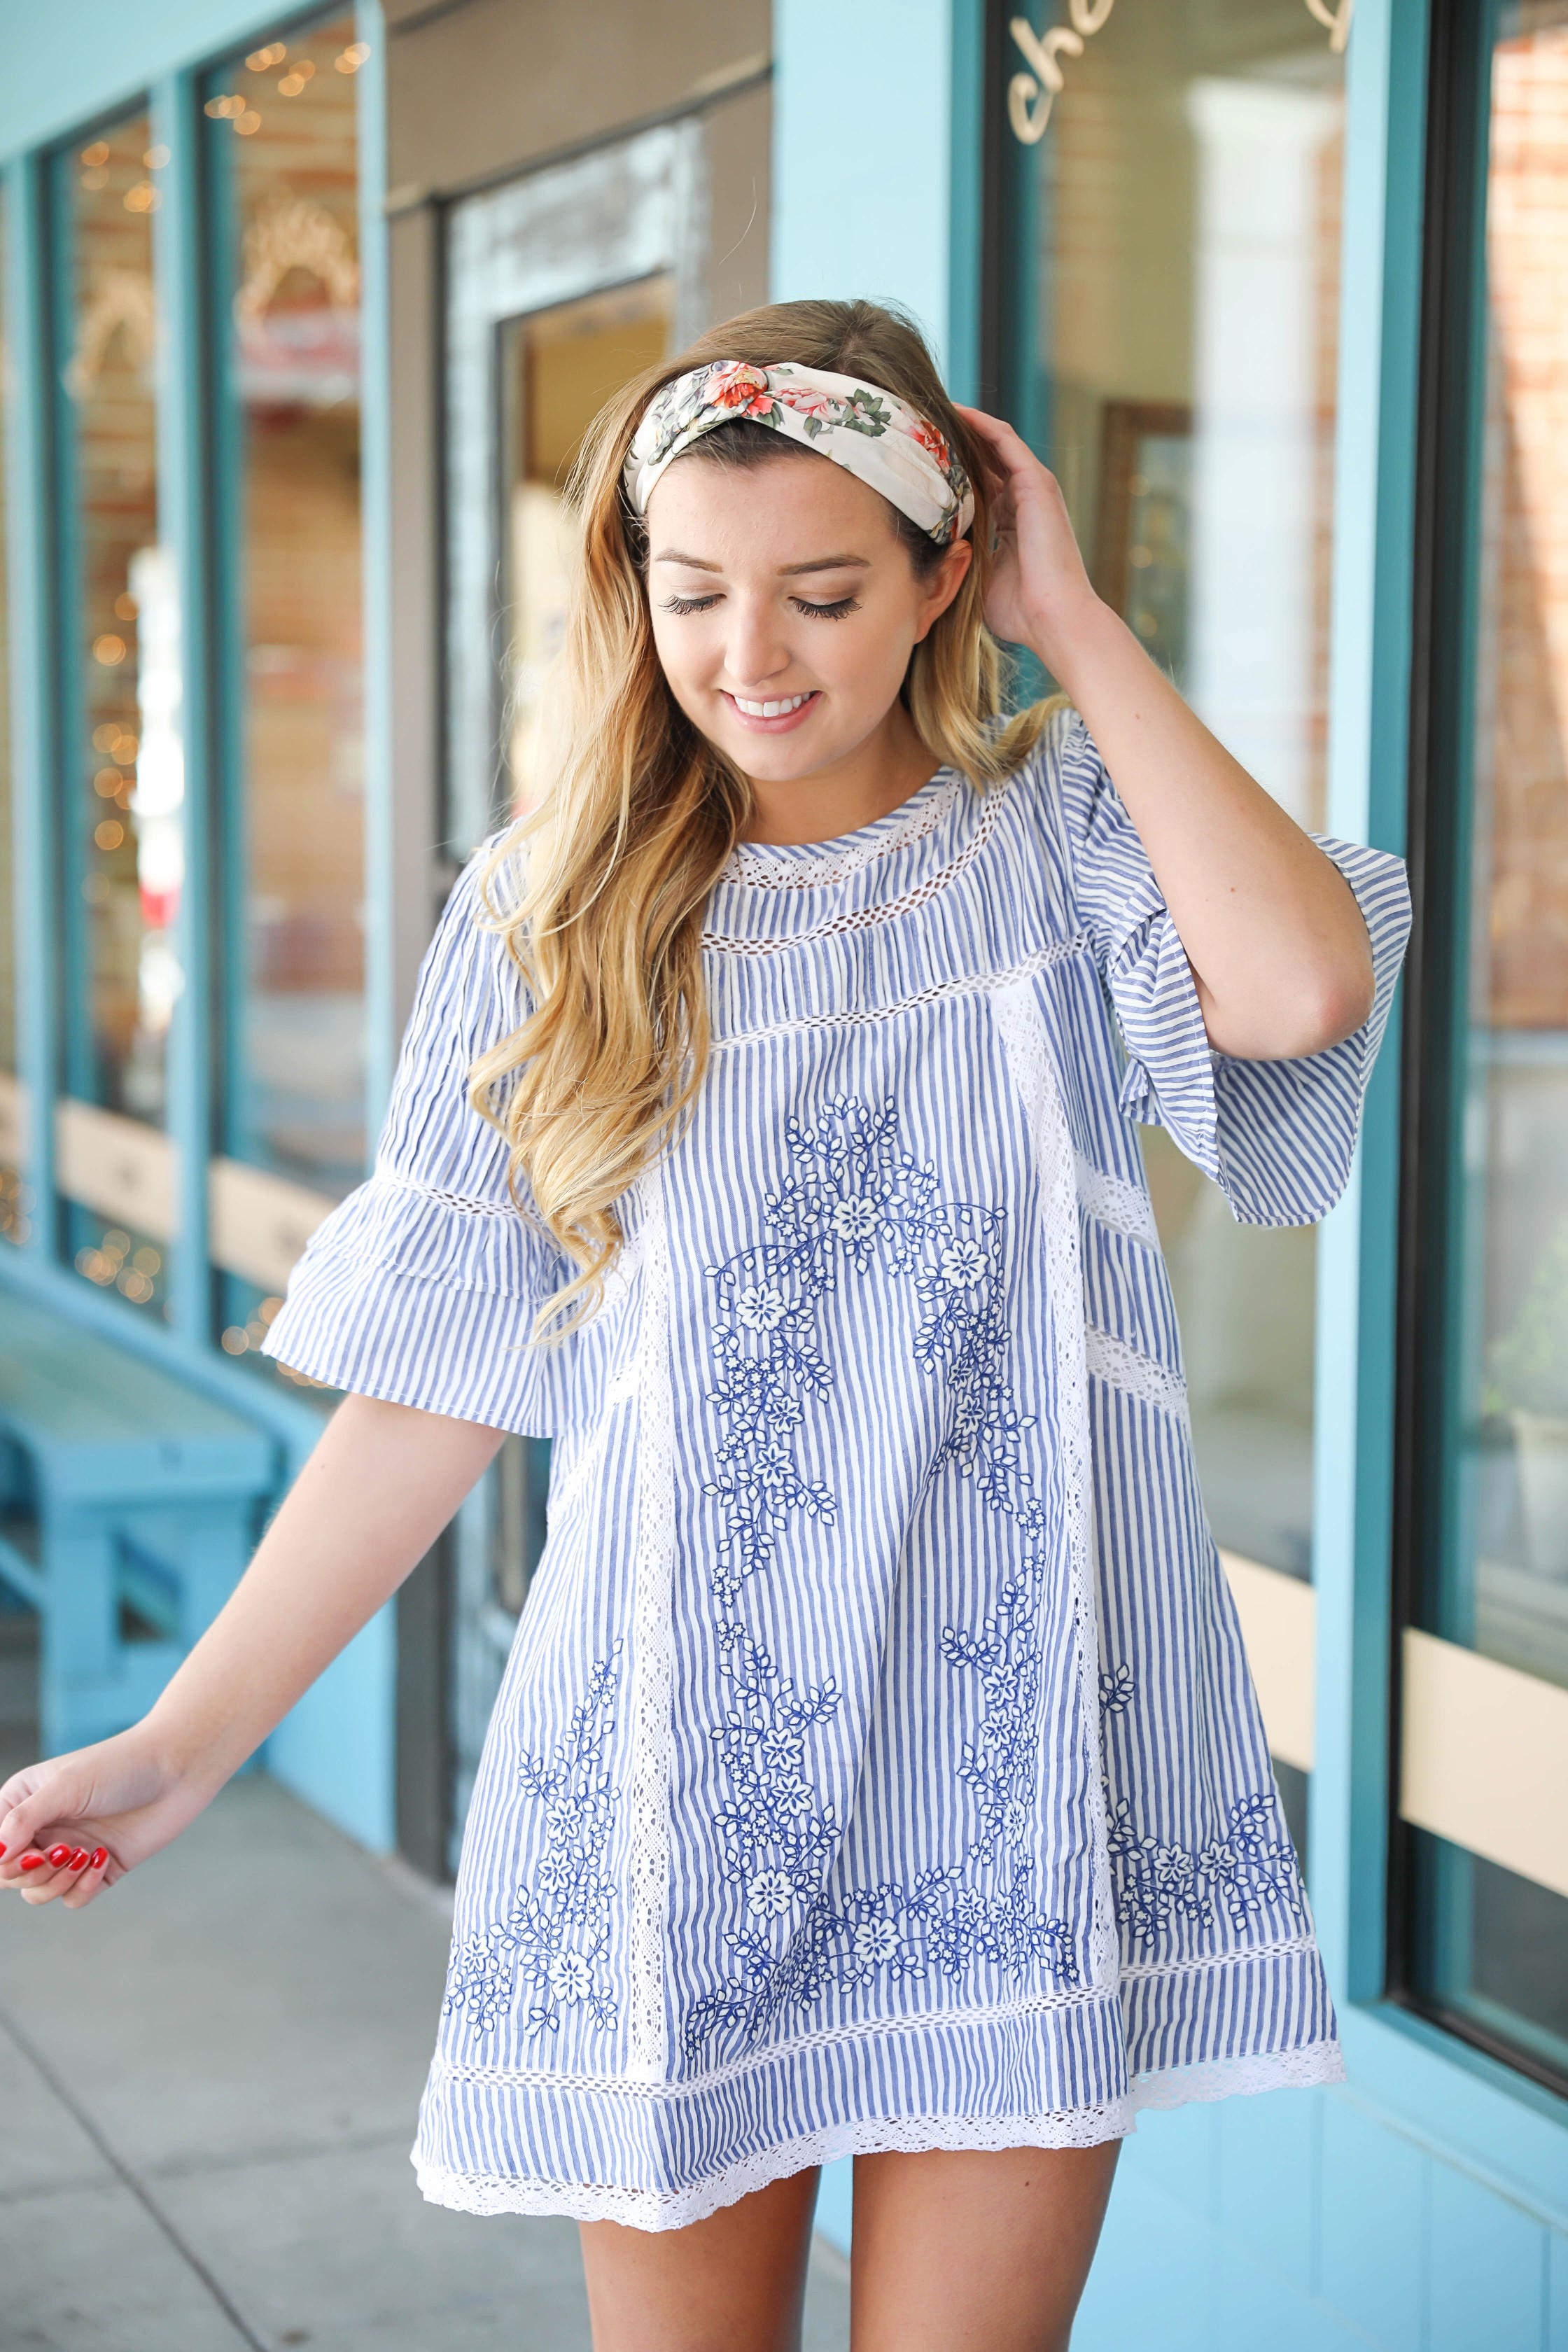 The perfect spring day outfit! I am loving casual dresses right now, and this one by Free People is so cute! The Seersucker flowy embrodiered dress goes perfectly with a floral knot headband and espadrille sandals! Get the details on fashion blog daily dose of charm by lauren lindmark